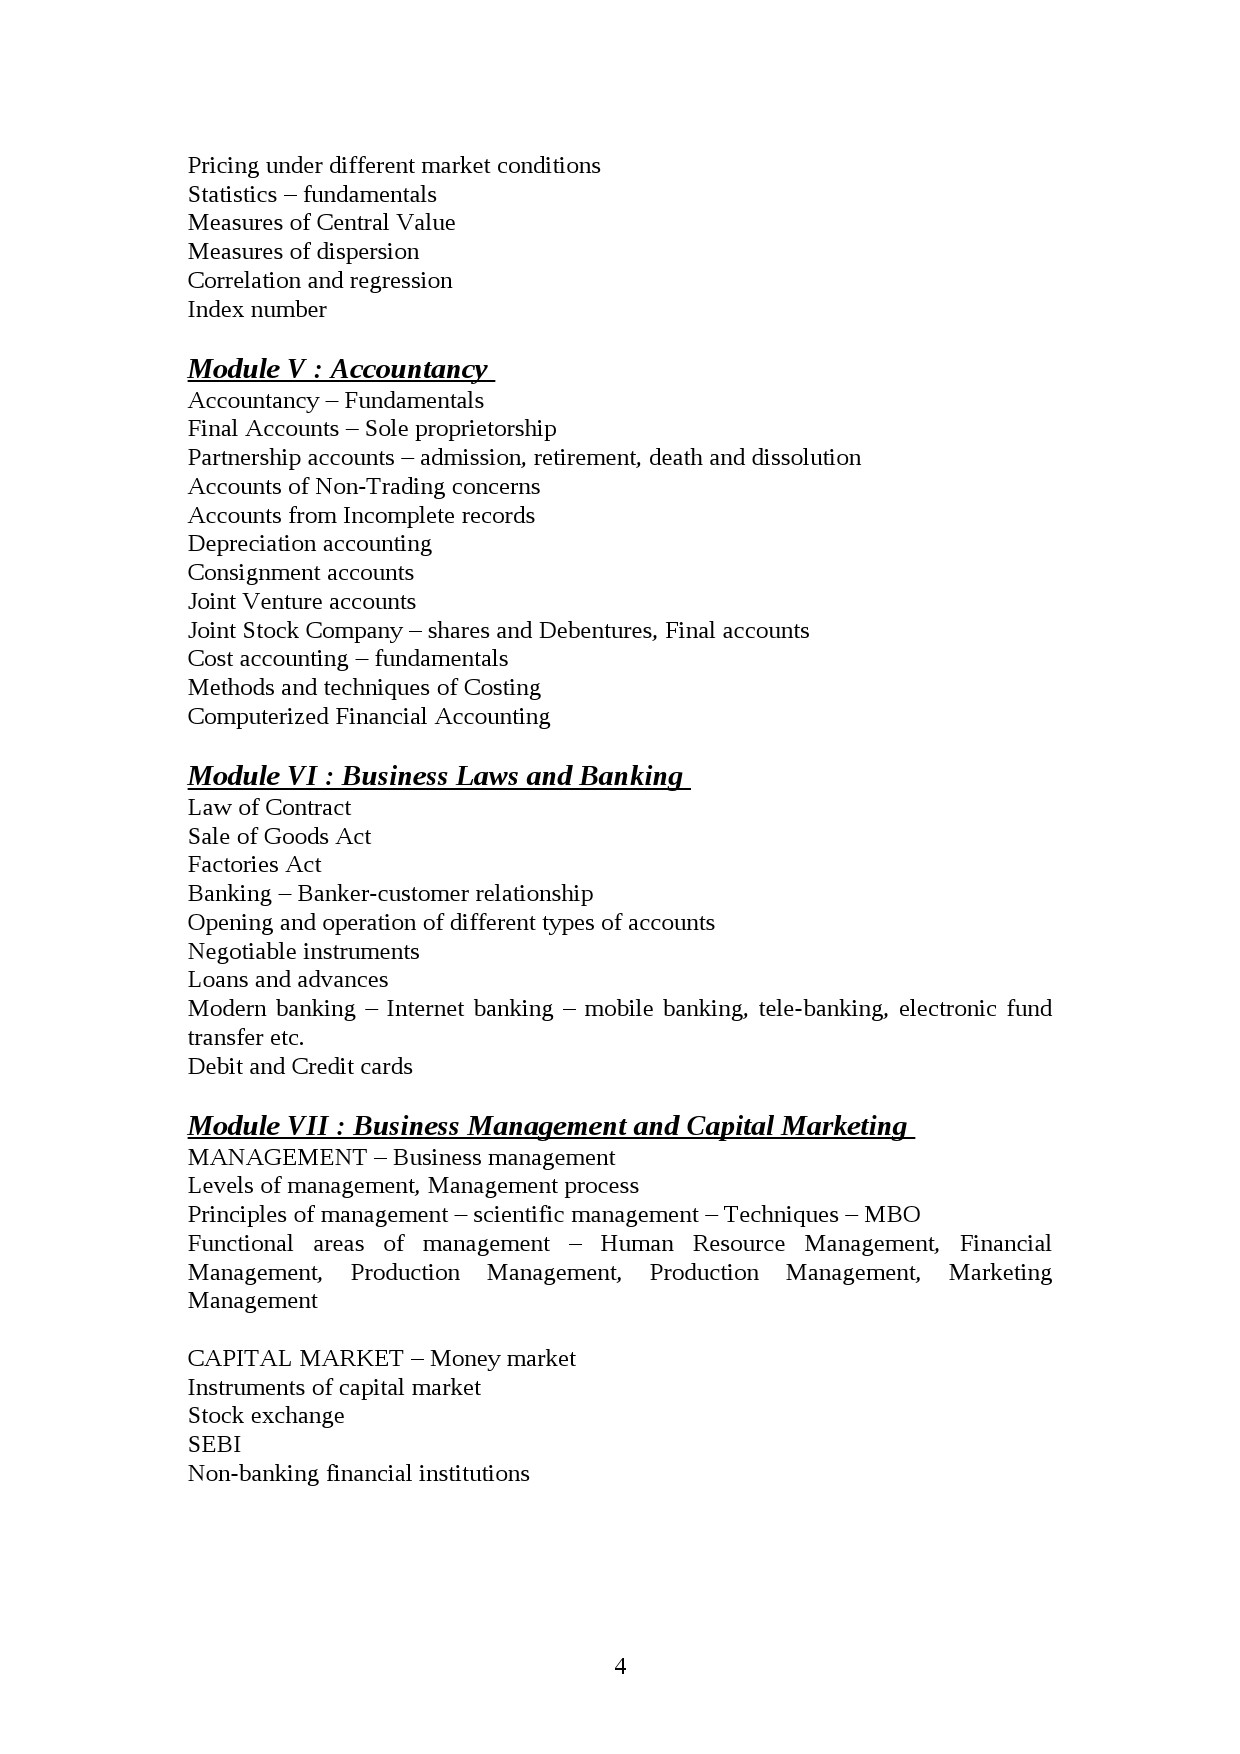 Commercial Practice Lecturer in Polytechnic Exam Syllabus - Notification Image 4